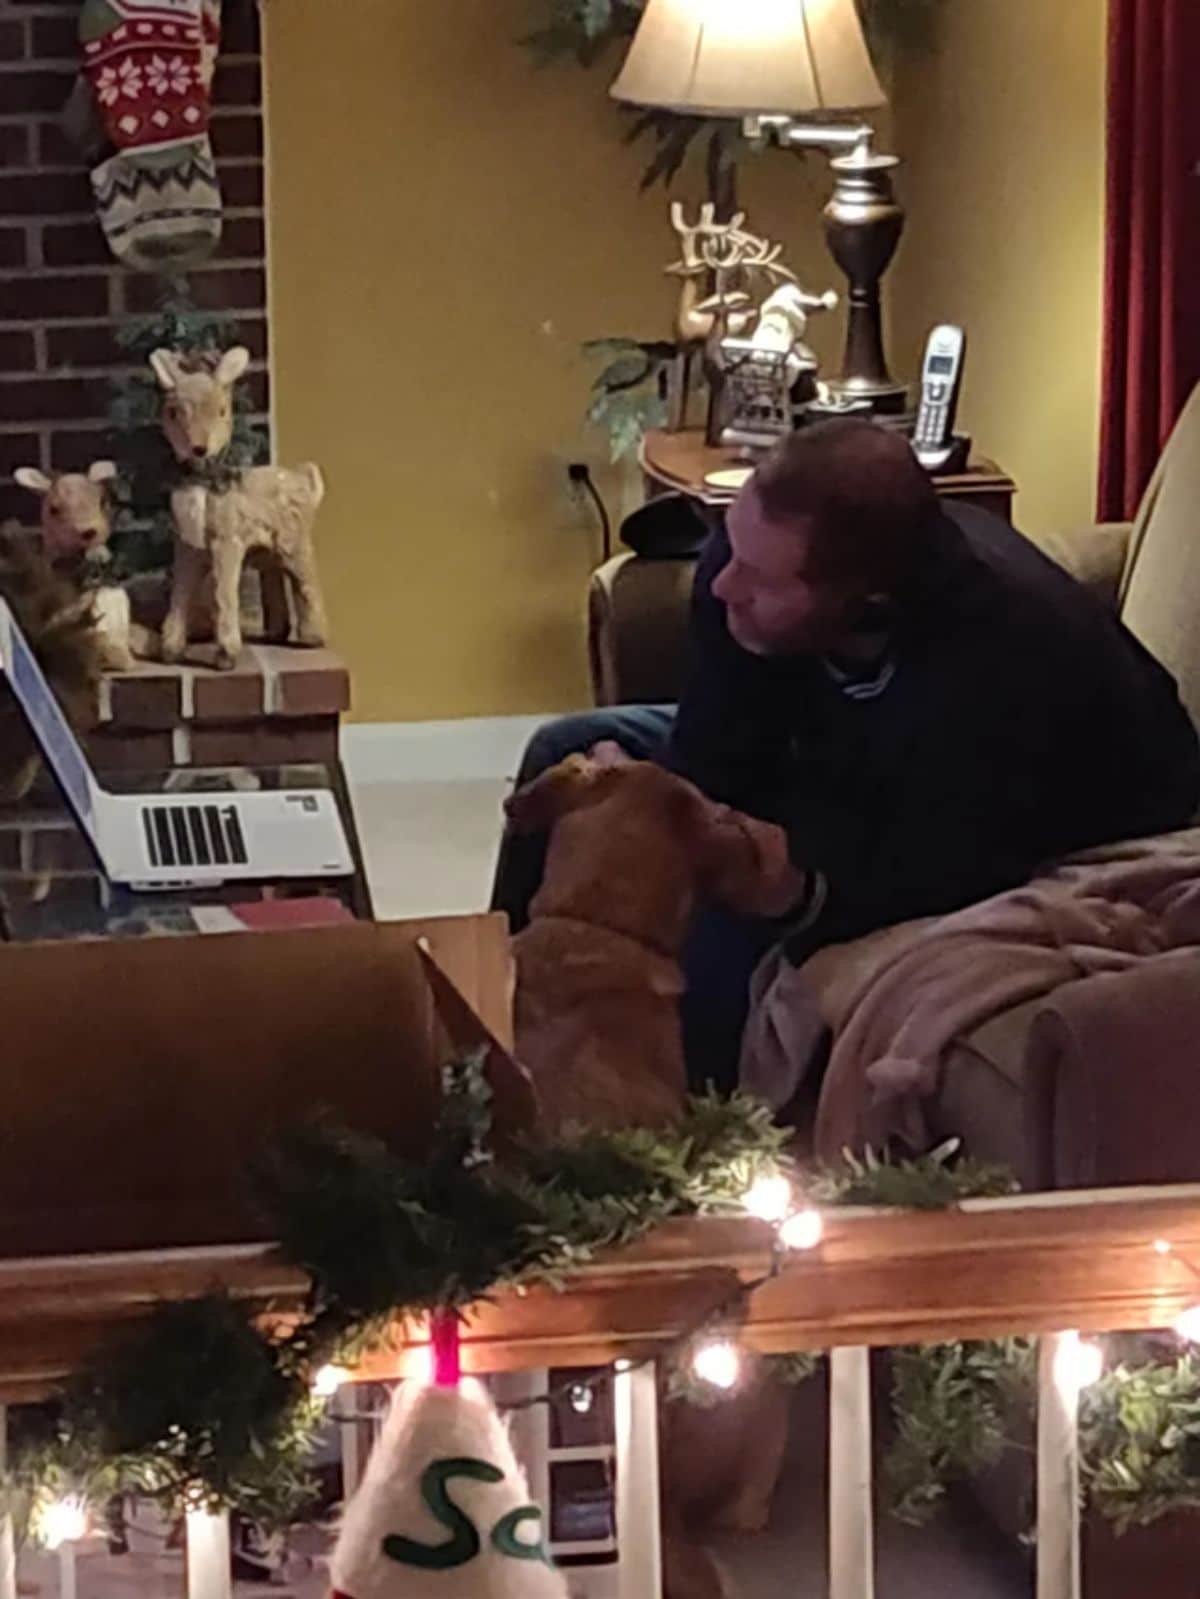 man watching something on a laptop holding a brown dog